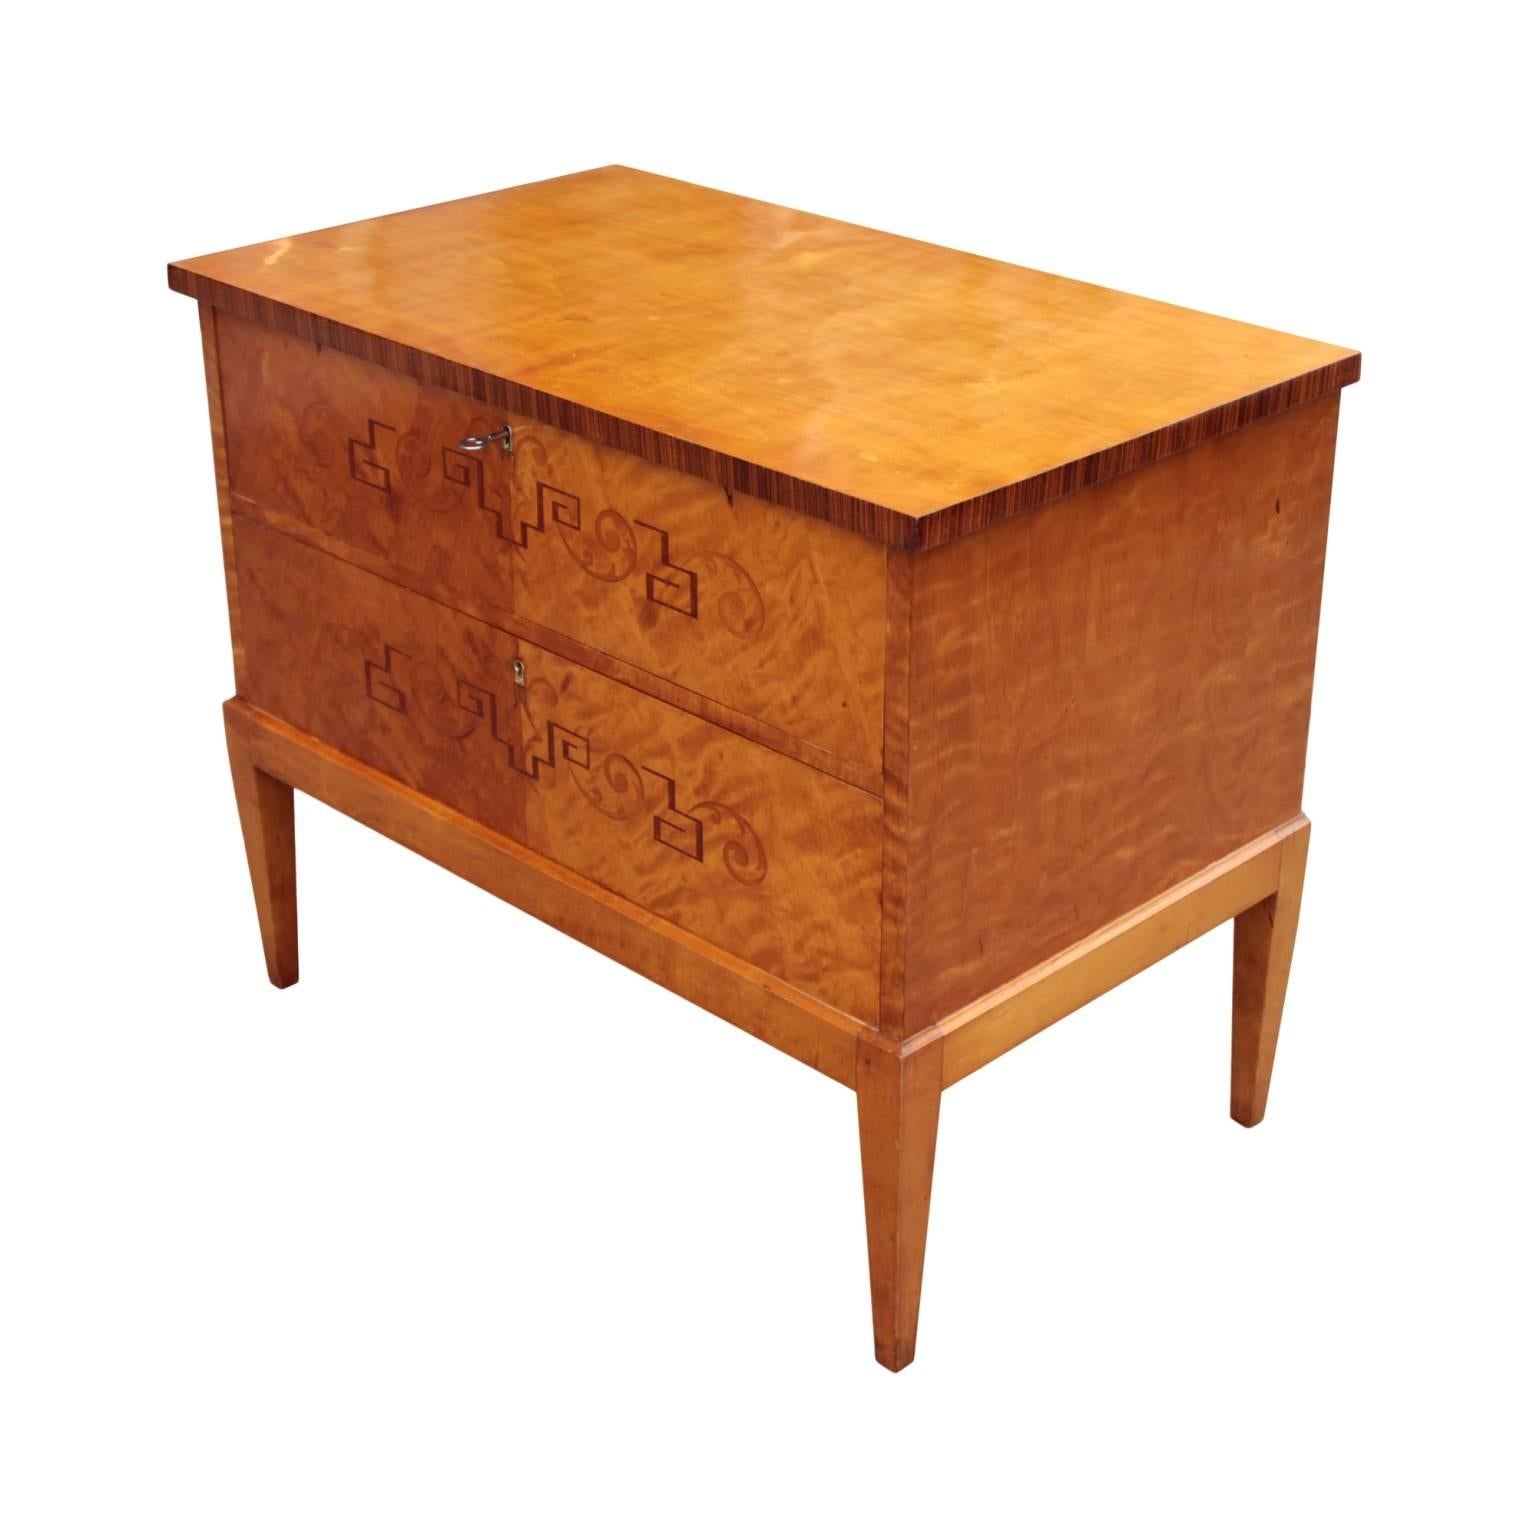 Elegant Swedish neoclassical small chest made during Grace period (1920's). Protruding top with rosewood edge resting on a cabinet with two drawers decorated with inlays in rosewood, walnut and maple depicting acanthus leaves and meanders. Raised on